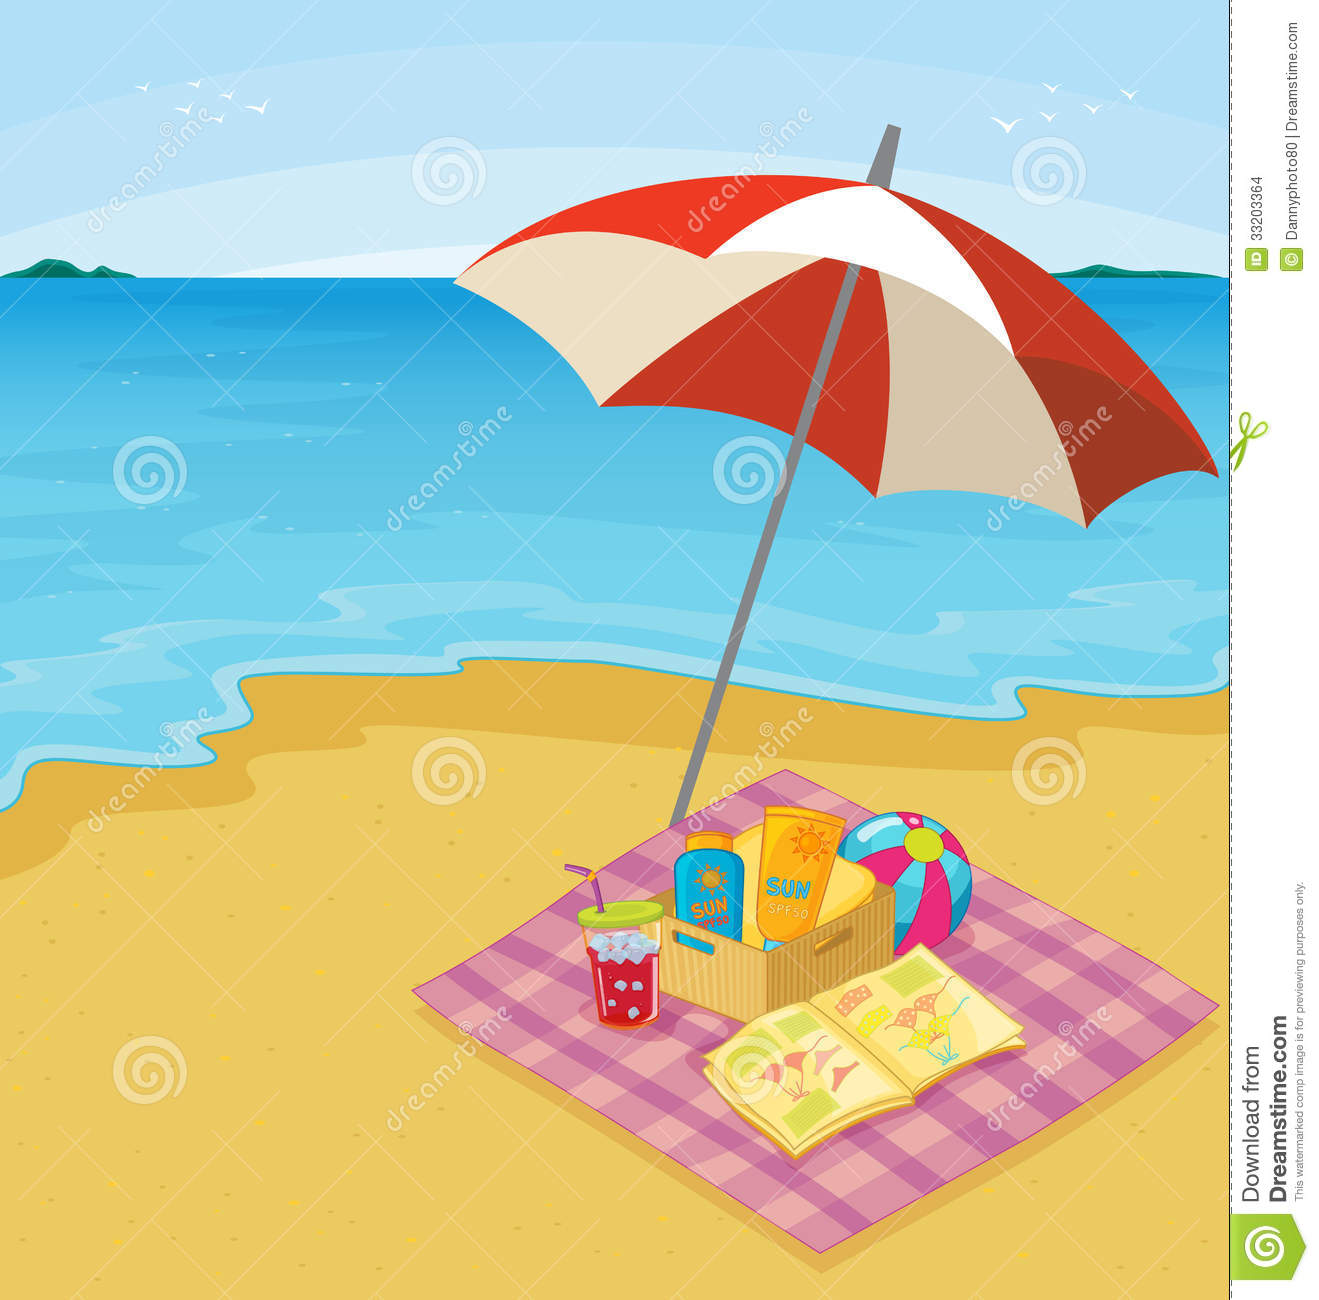 Illustration Of A Blanket Of Items At The Beach